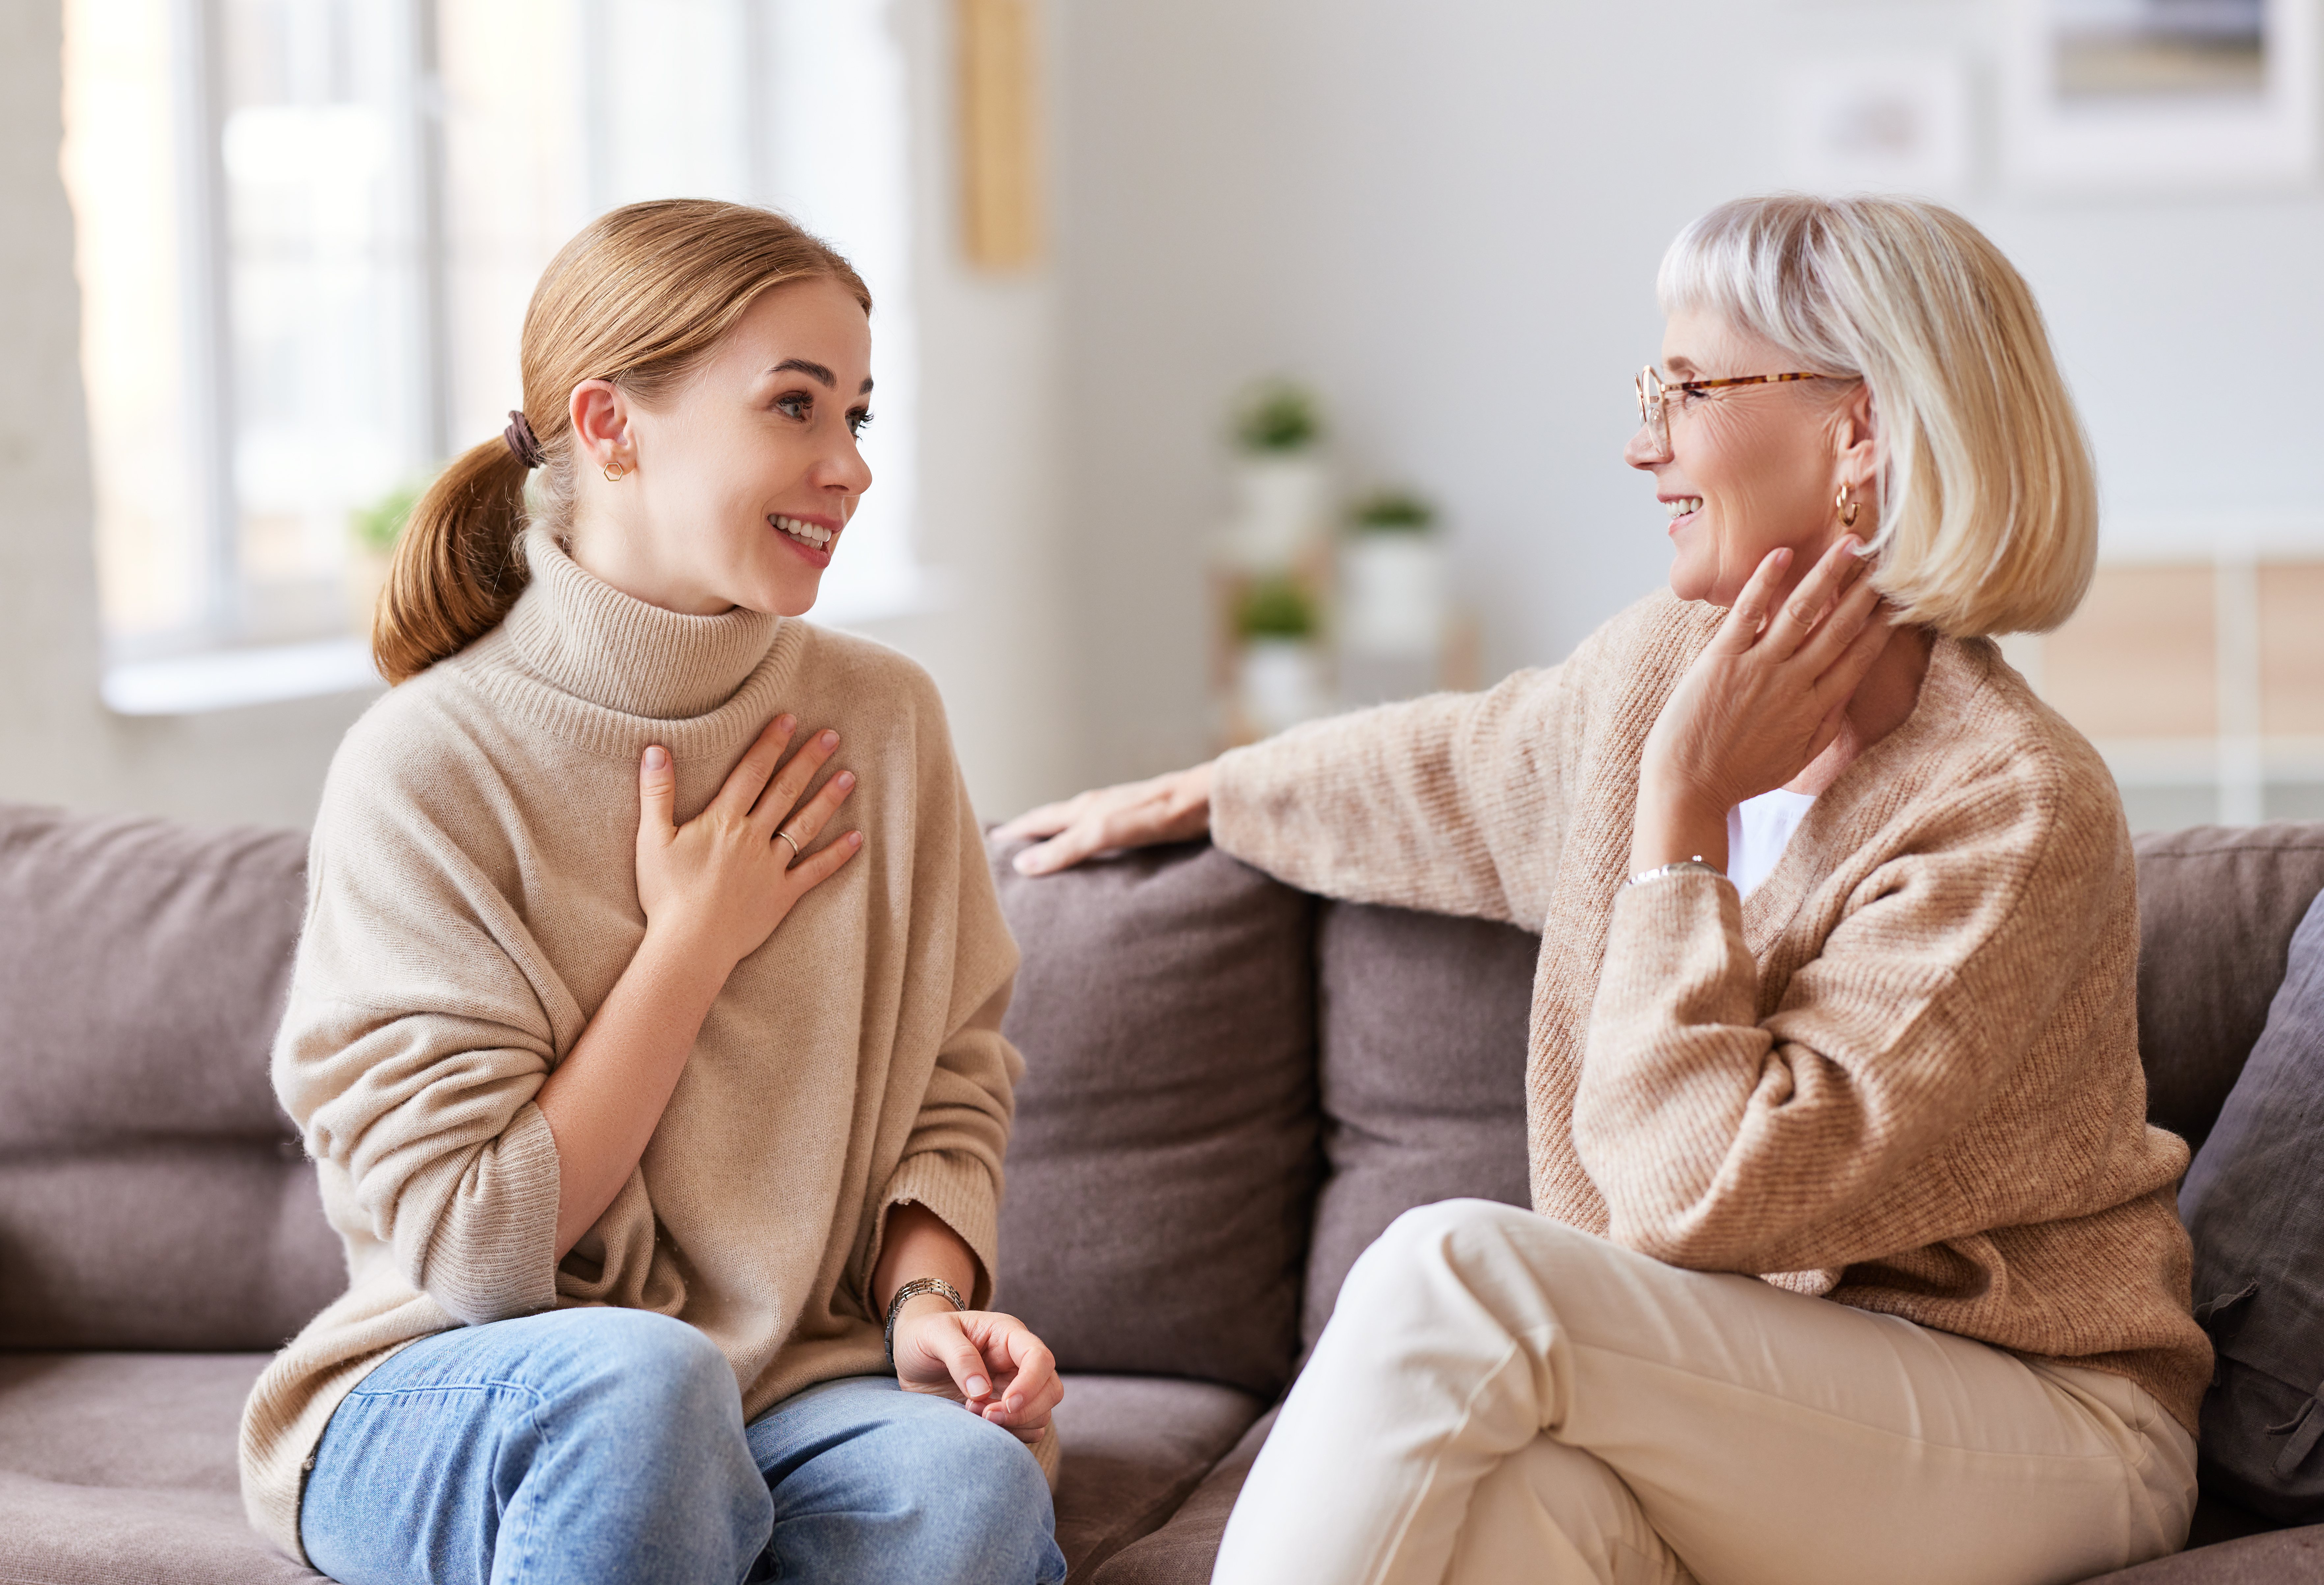 A younger woman smiling while talking to an older one while seated on a couch | Source: Shutterstock